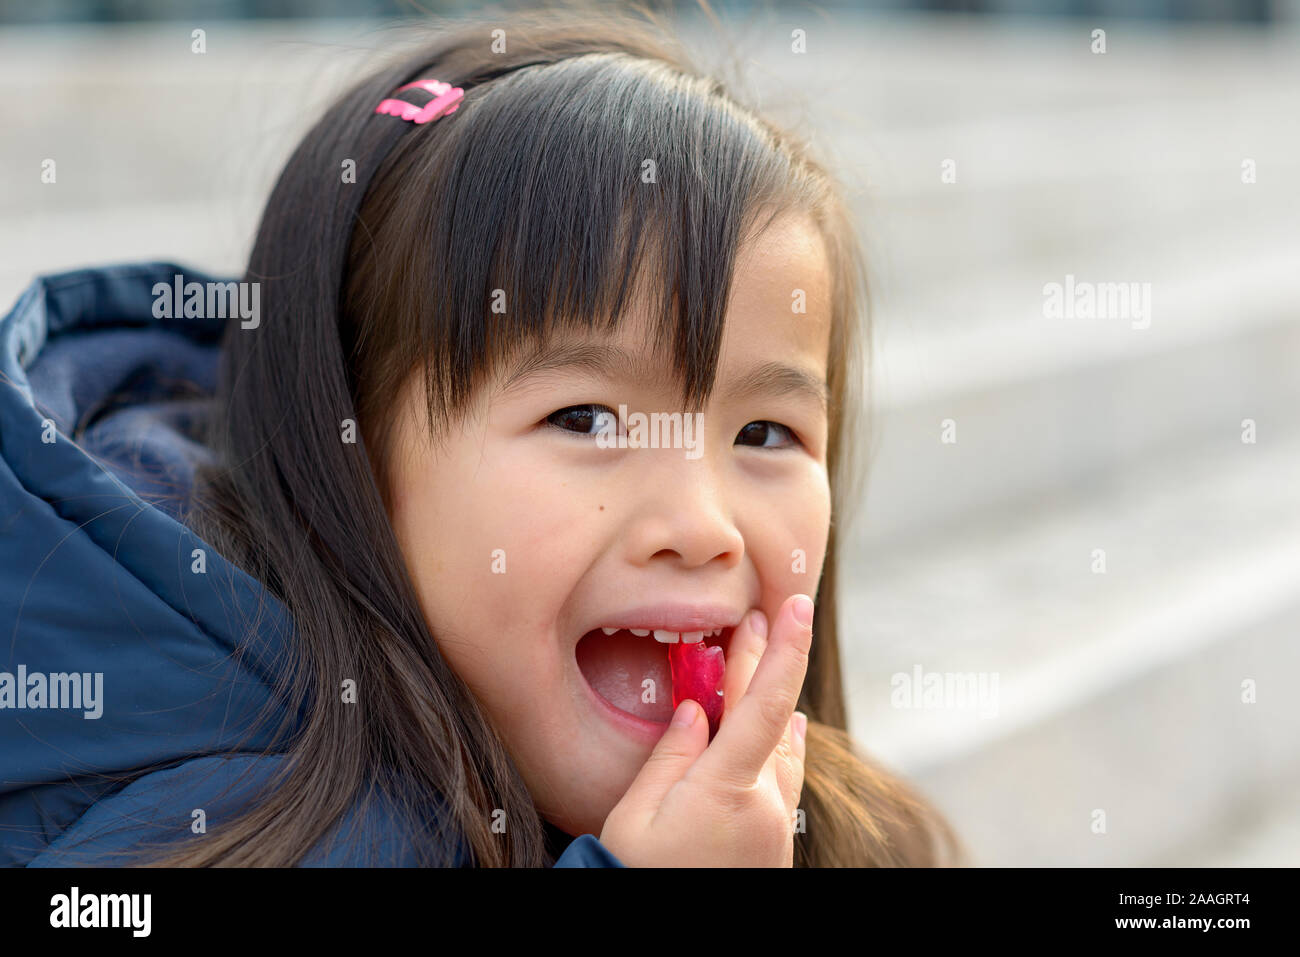 Pretty little Asian girl popping a colorful red sweet into her mouth while glancing sideways at the camera Stock Photo